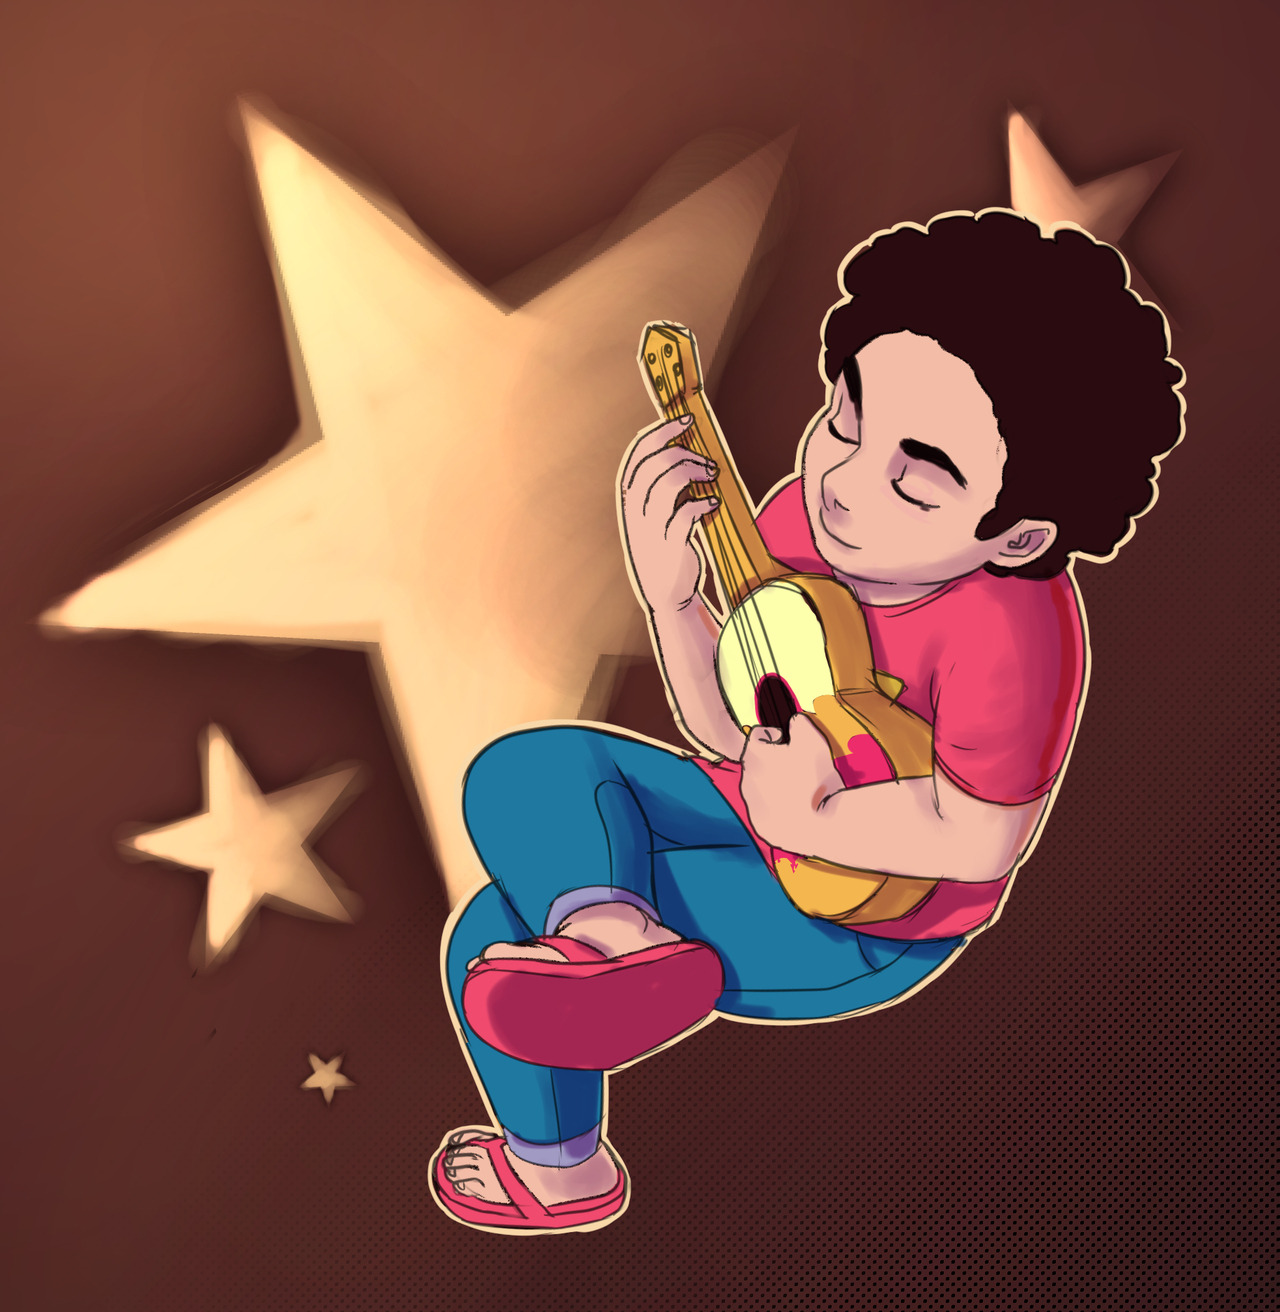 Day 2 of the Steven Universe Challege - the starchild himself, Steven!